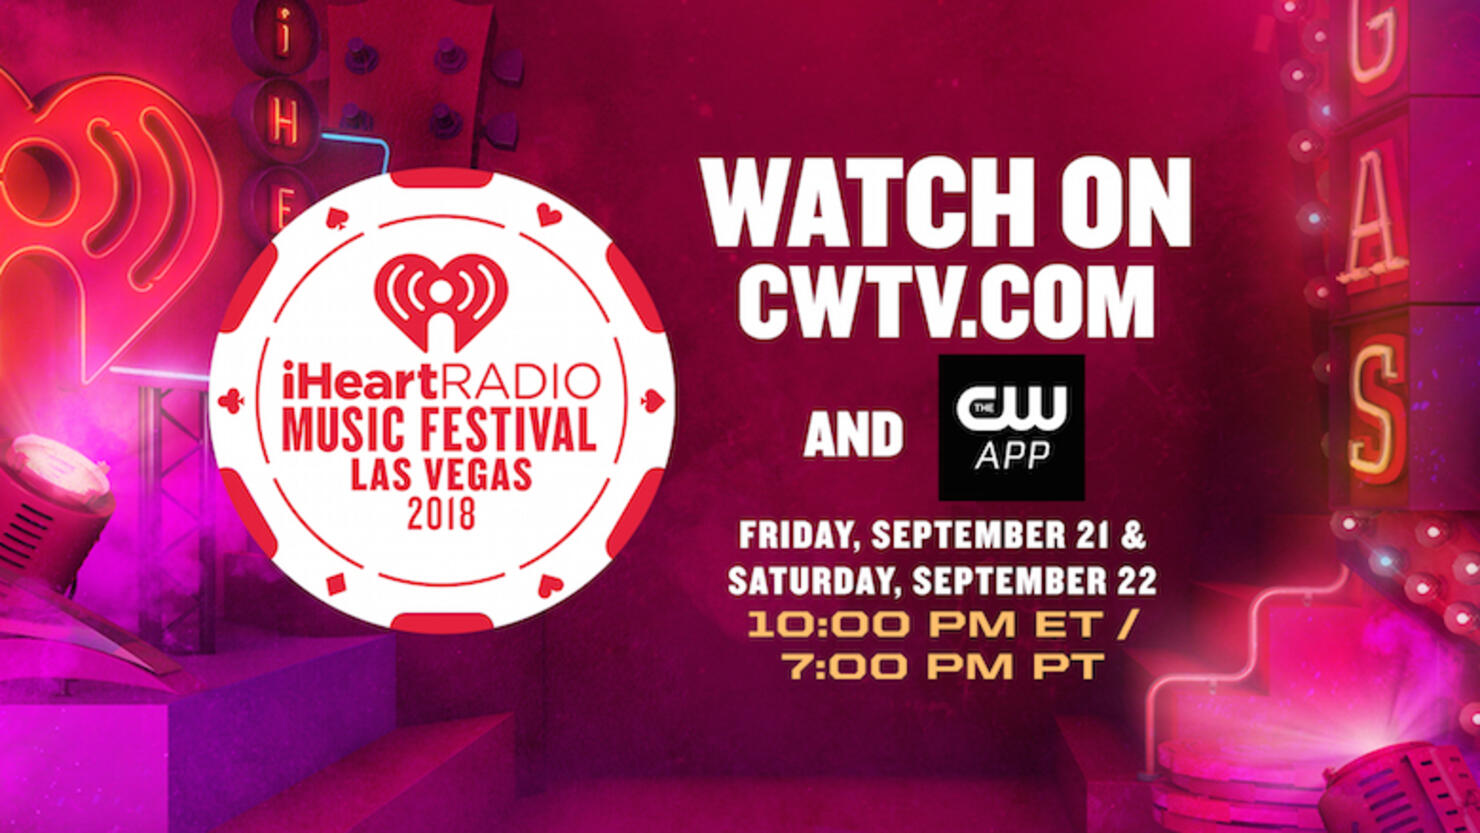 Stream Justin Timberlake - IHeartRadio Music Festival 2018 ft. Shawn Mendez  by clrdr15